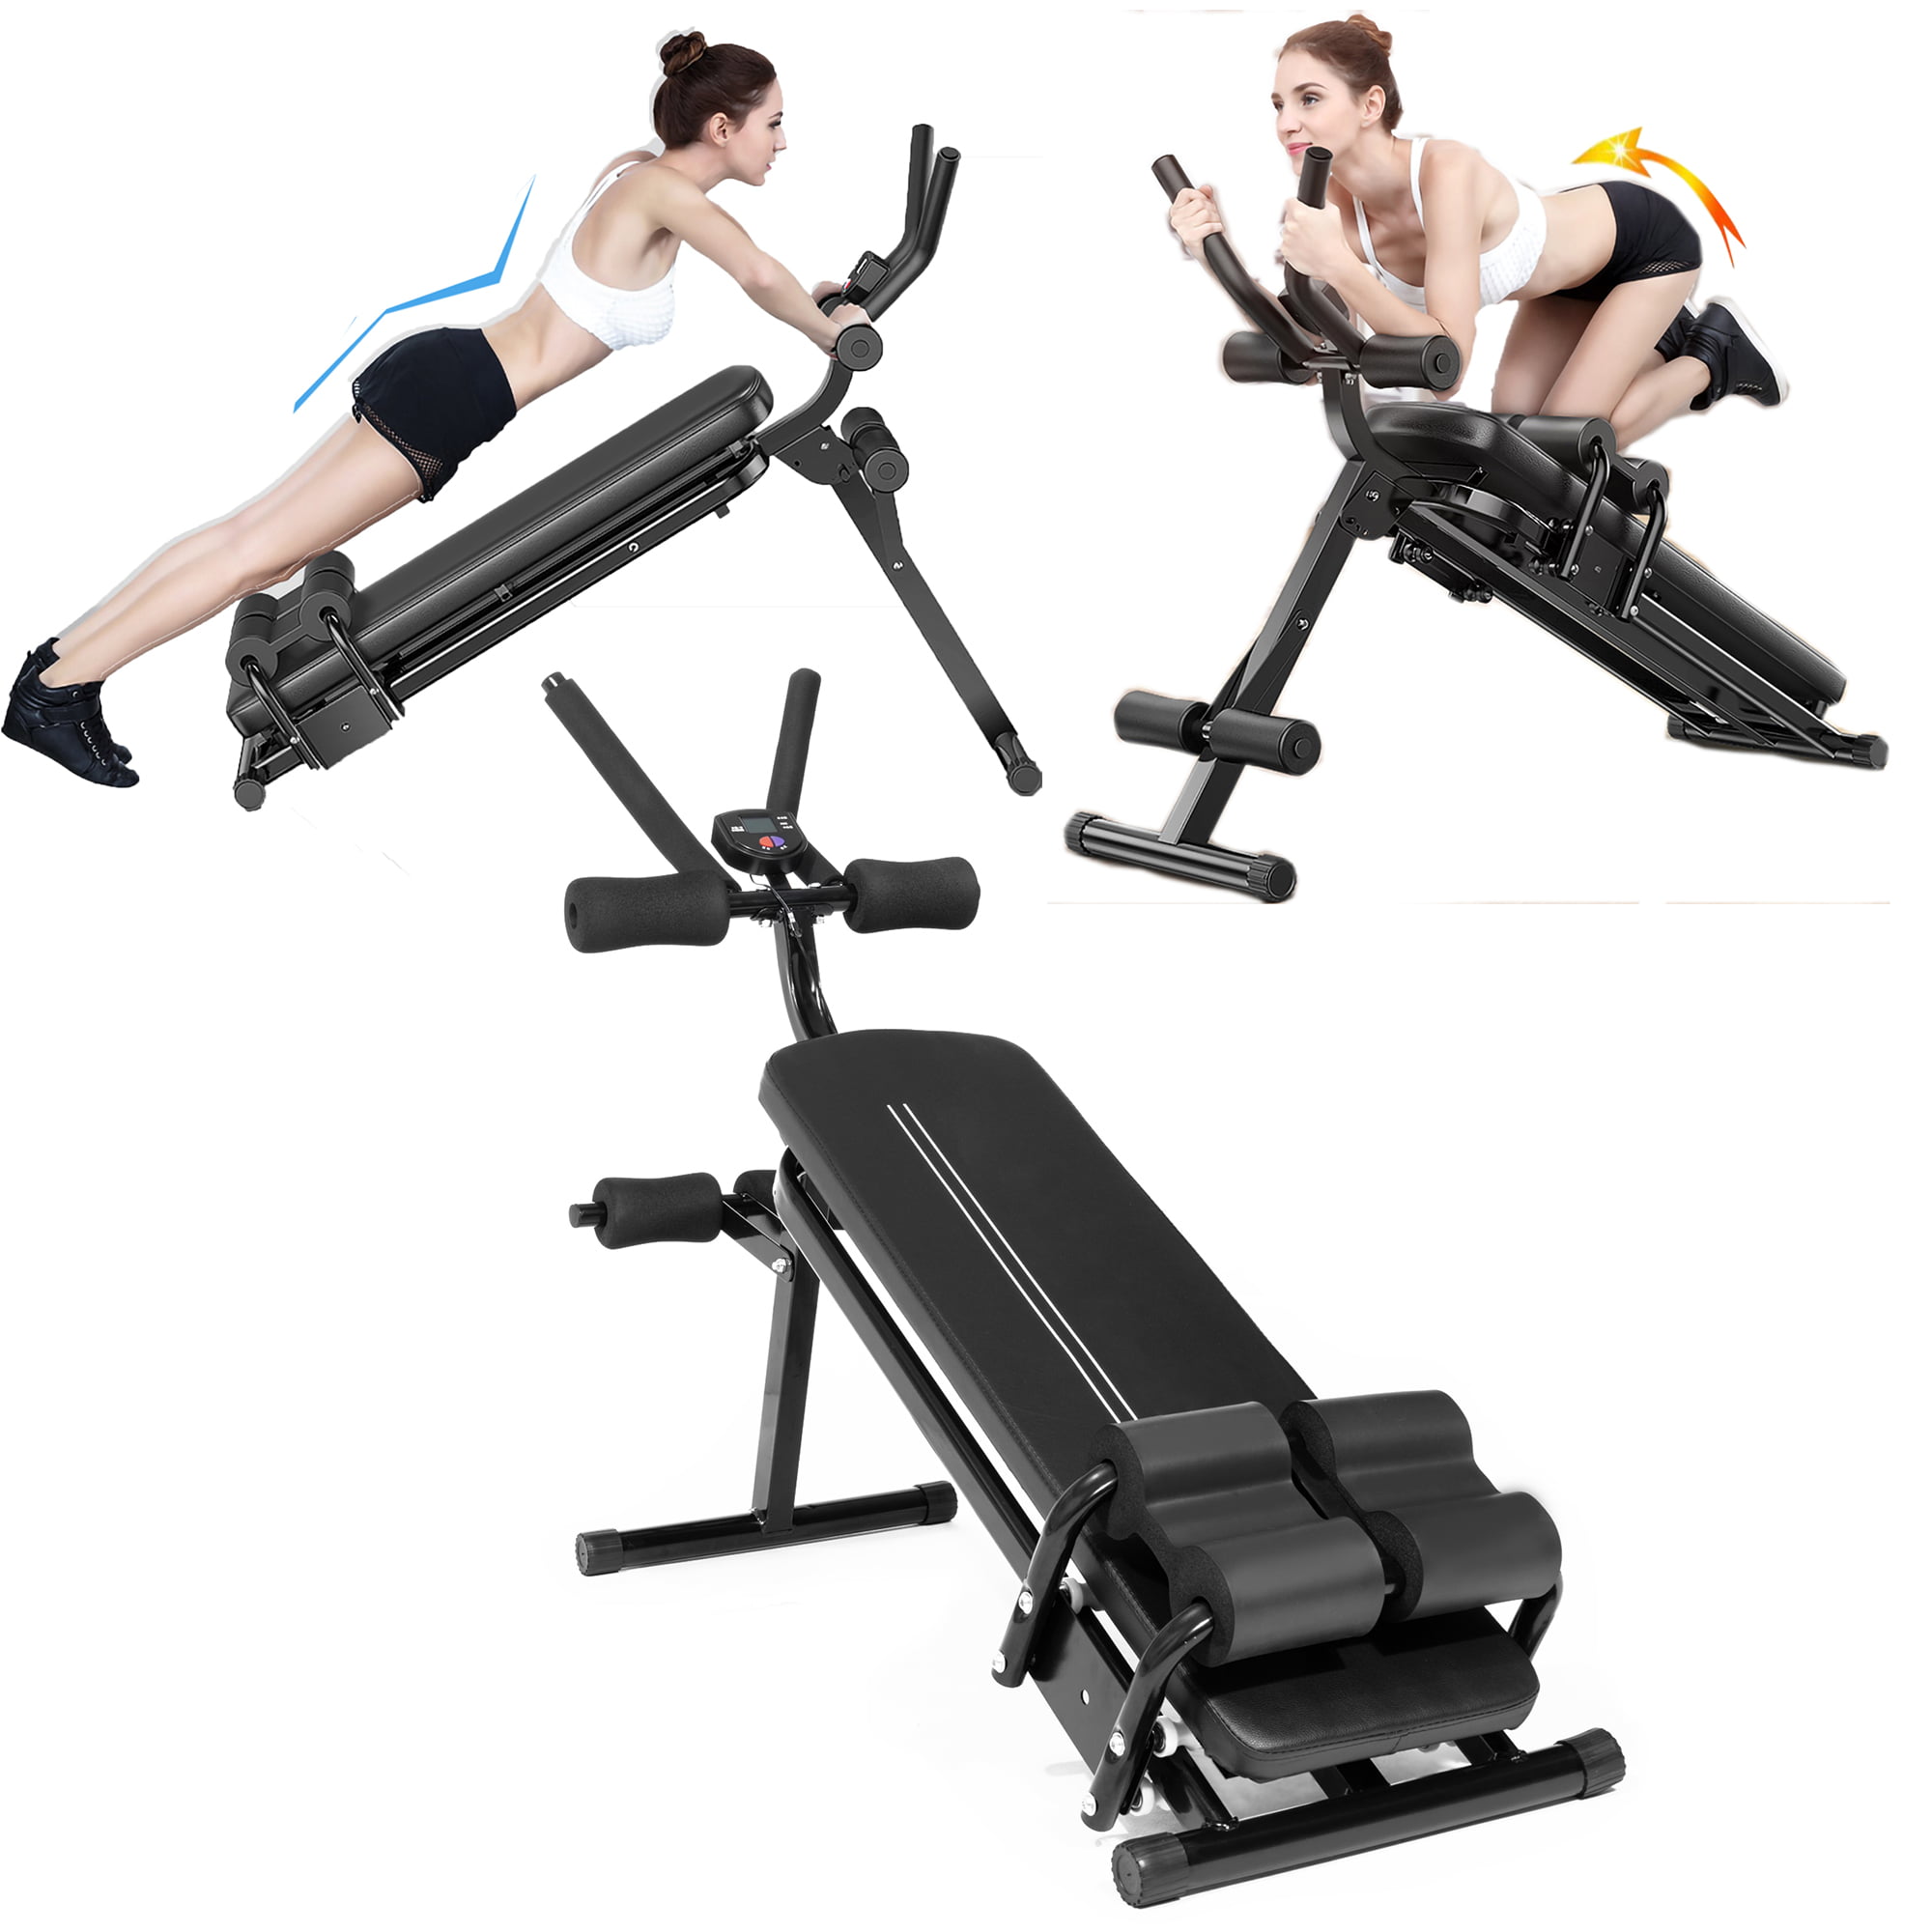 Details about   Sit Up Bench Decline Abdominal Fitness Home Gym Exercise Workout Core OT085 